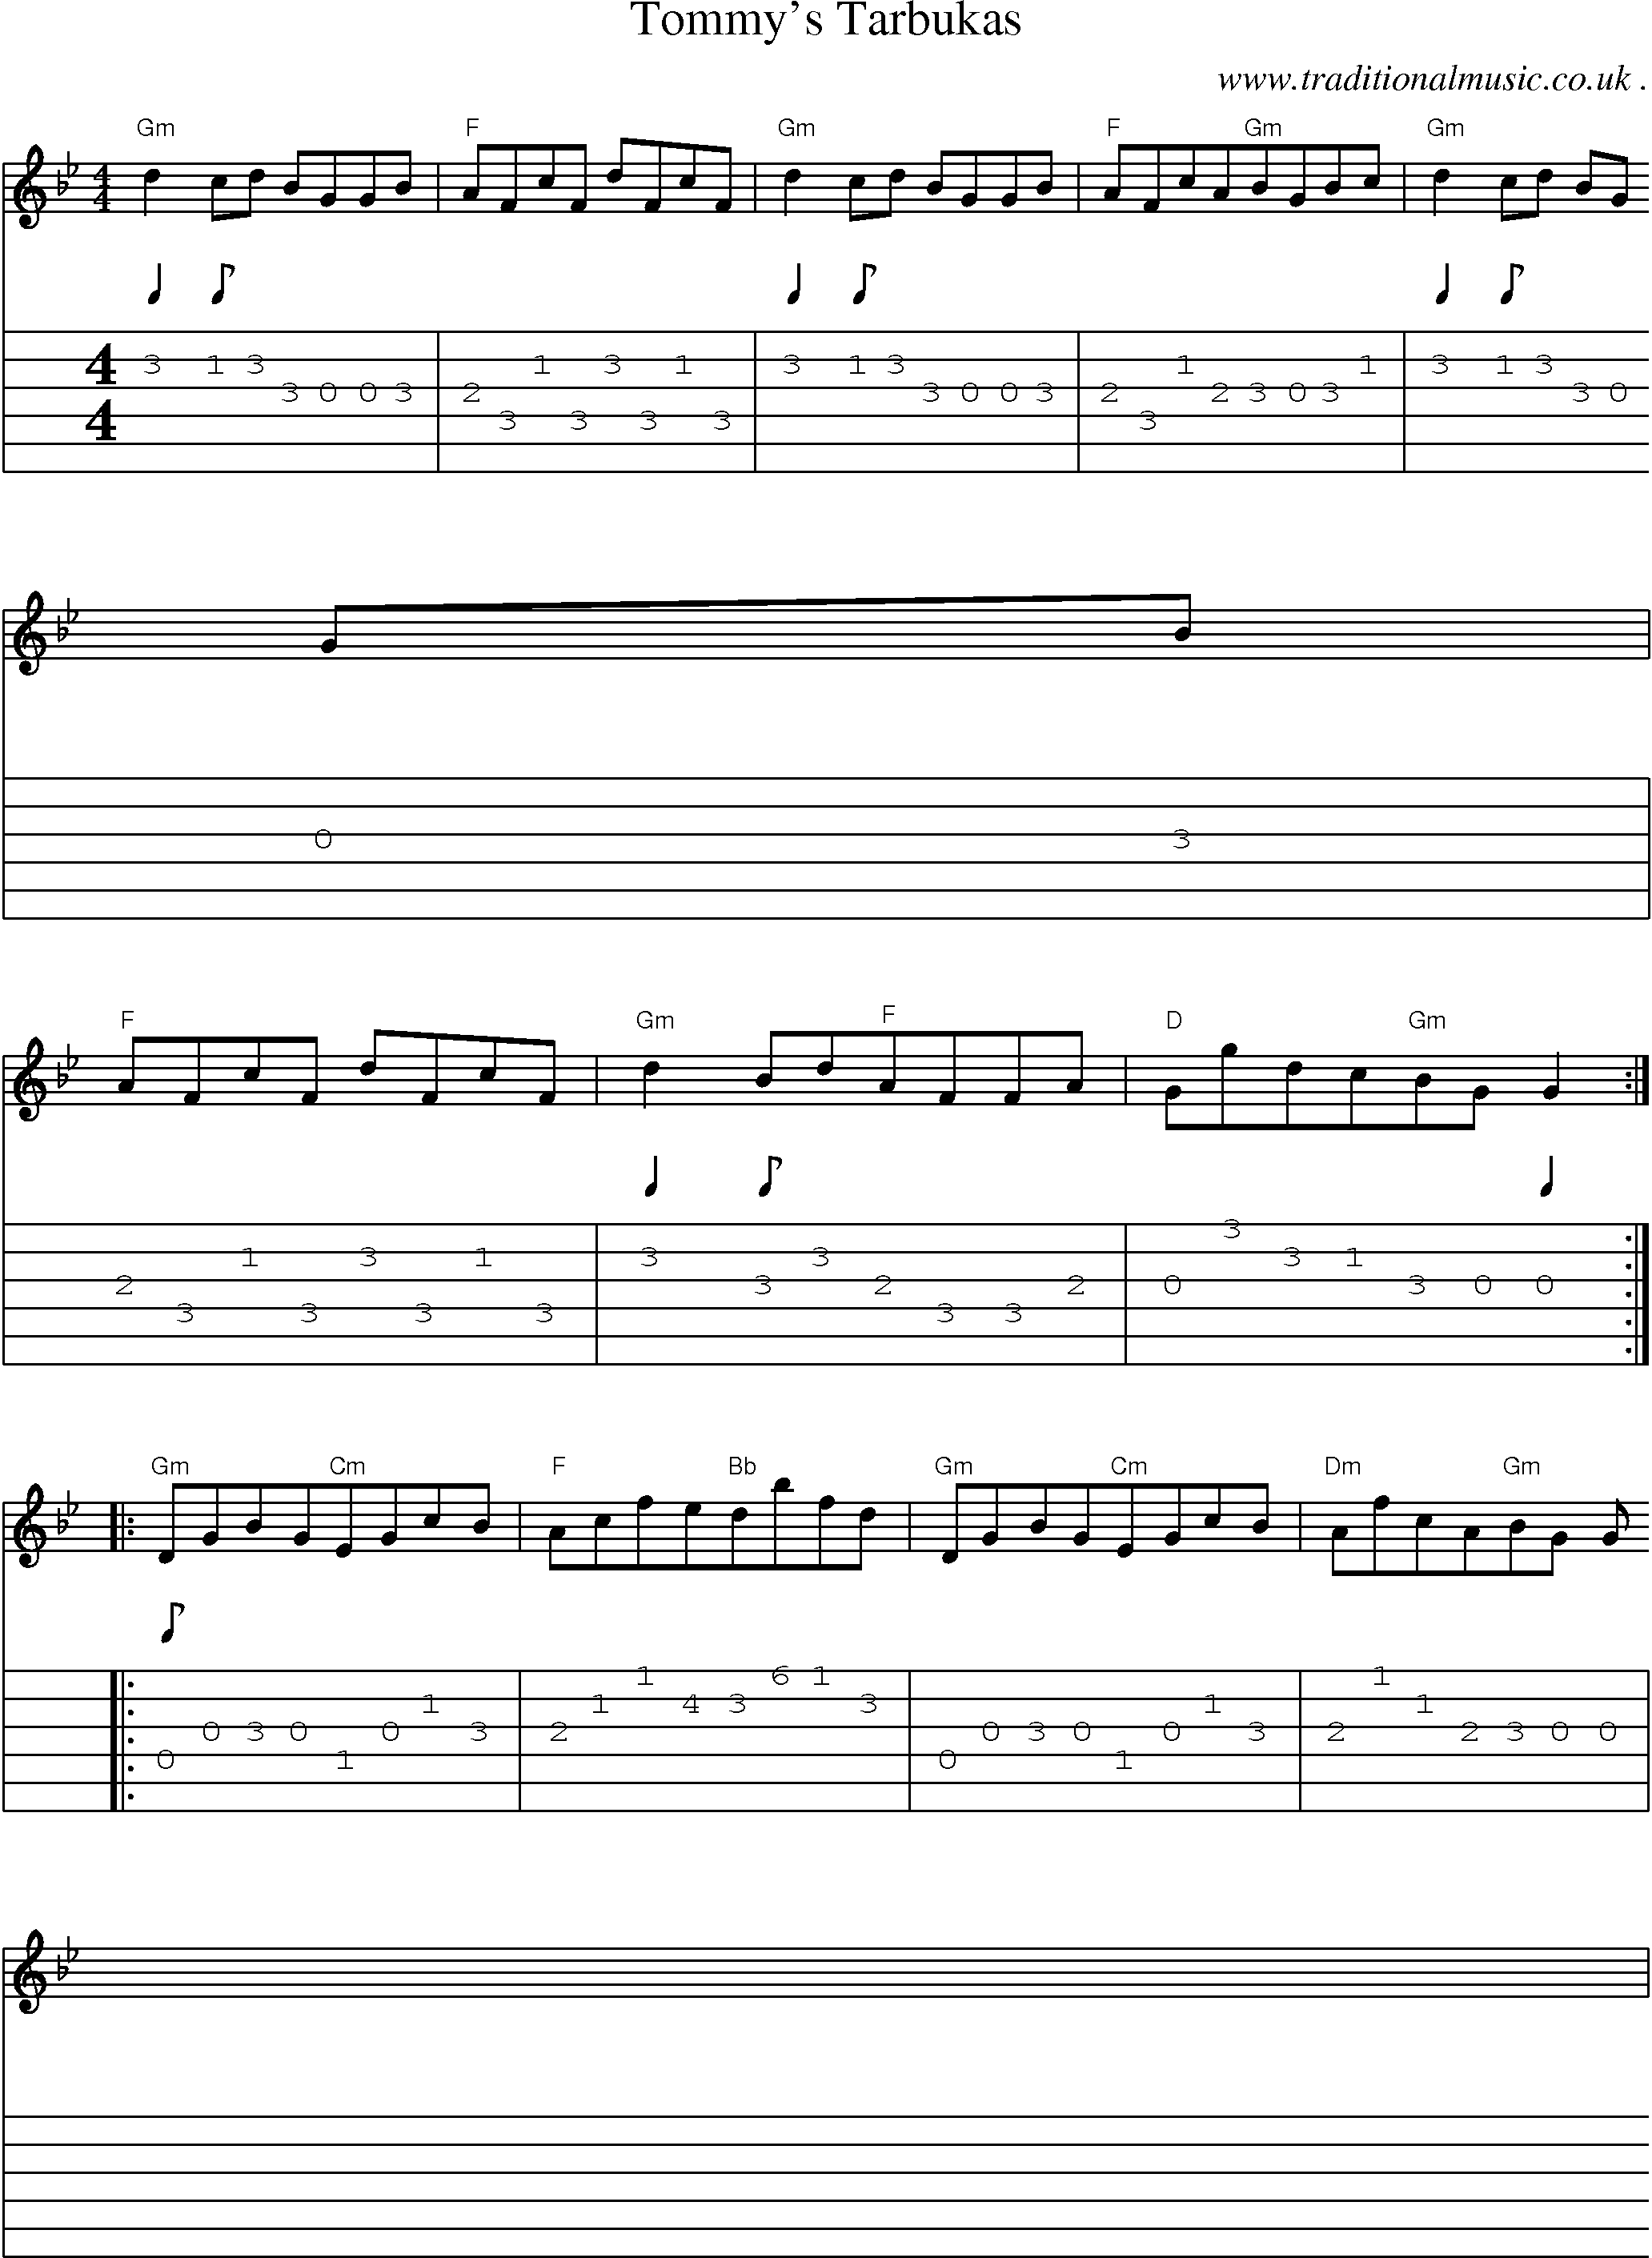 Sheet-Music and Guitar Tabs for Tommys Tarbukas